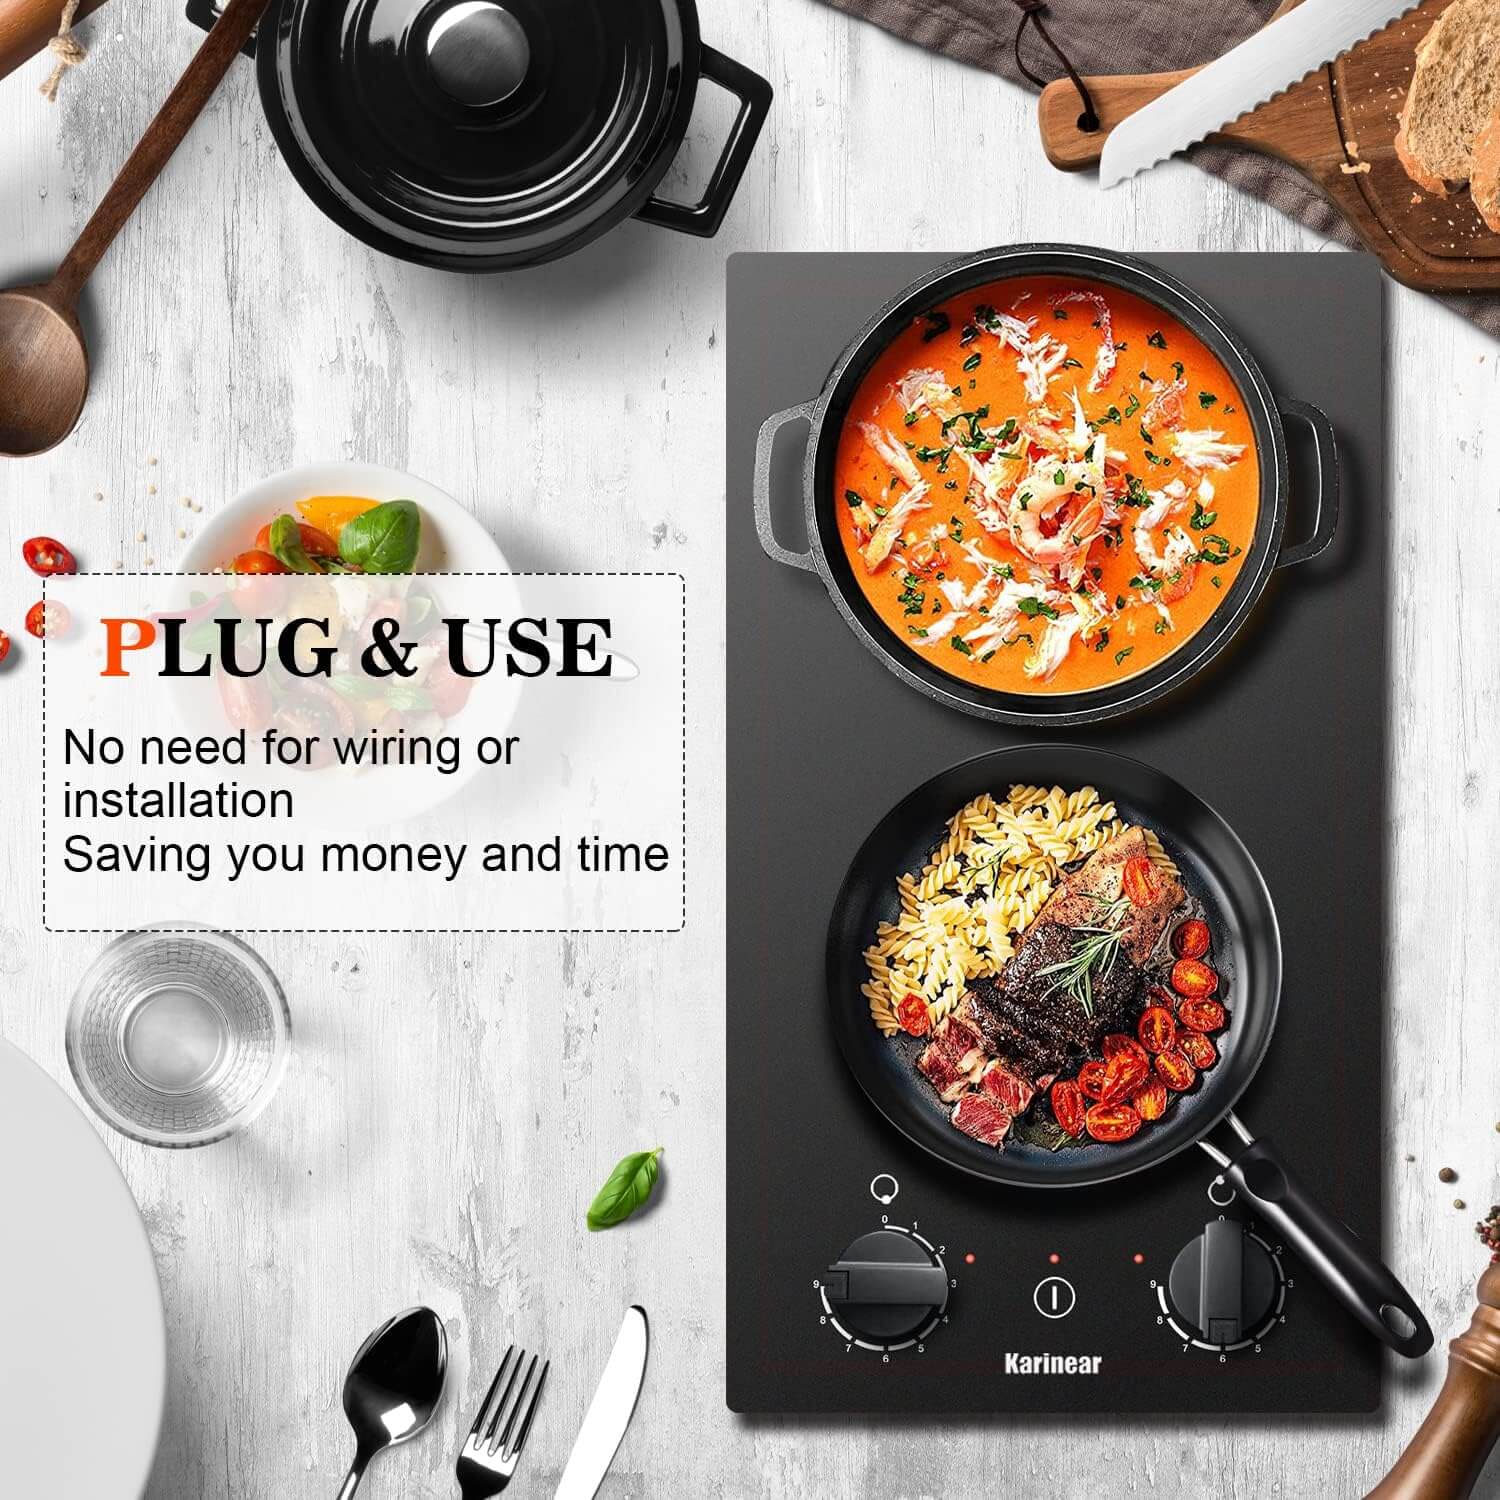 Karinear Induction Hob is designed with 4 independent heating zones that allow you can set each one separately using an independent touch key. 